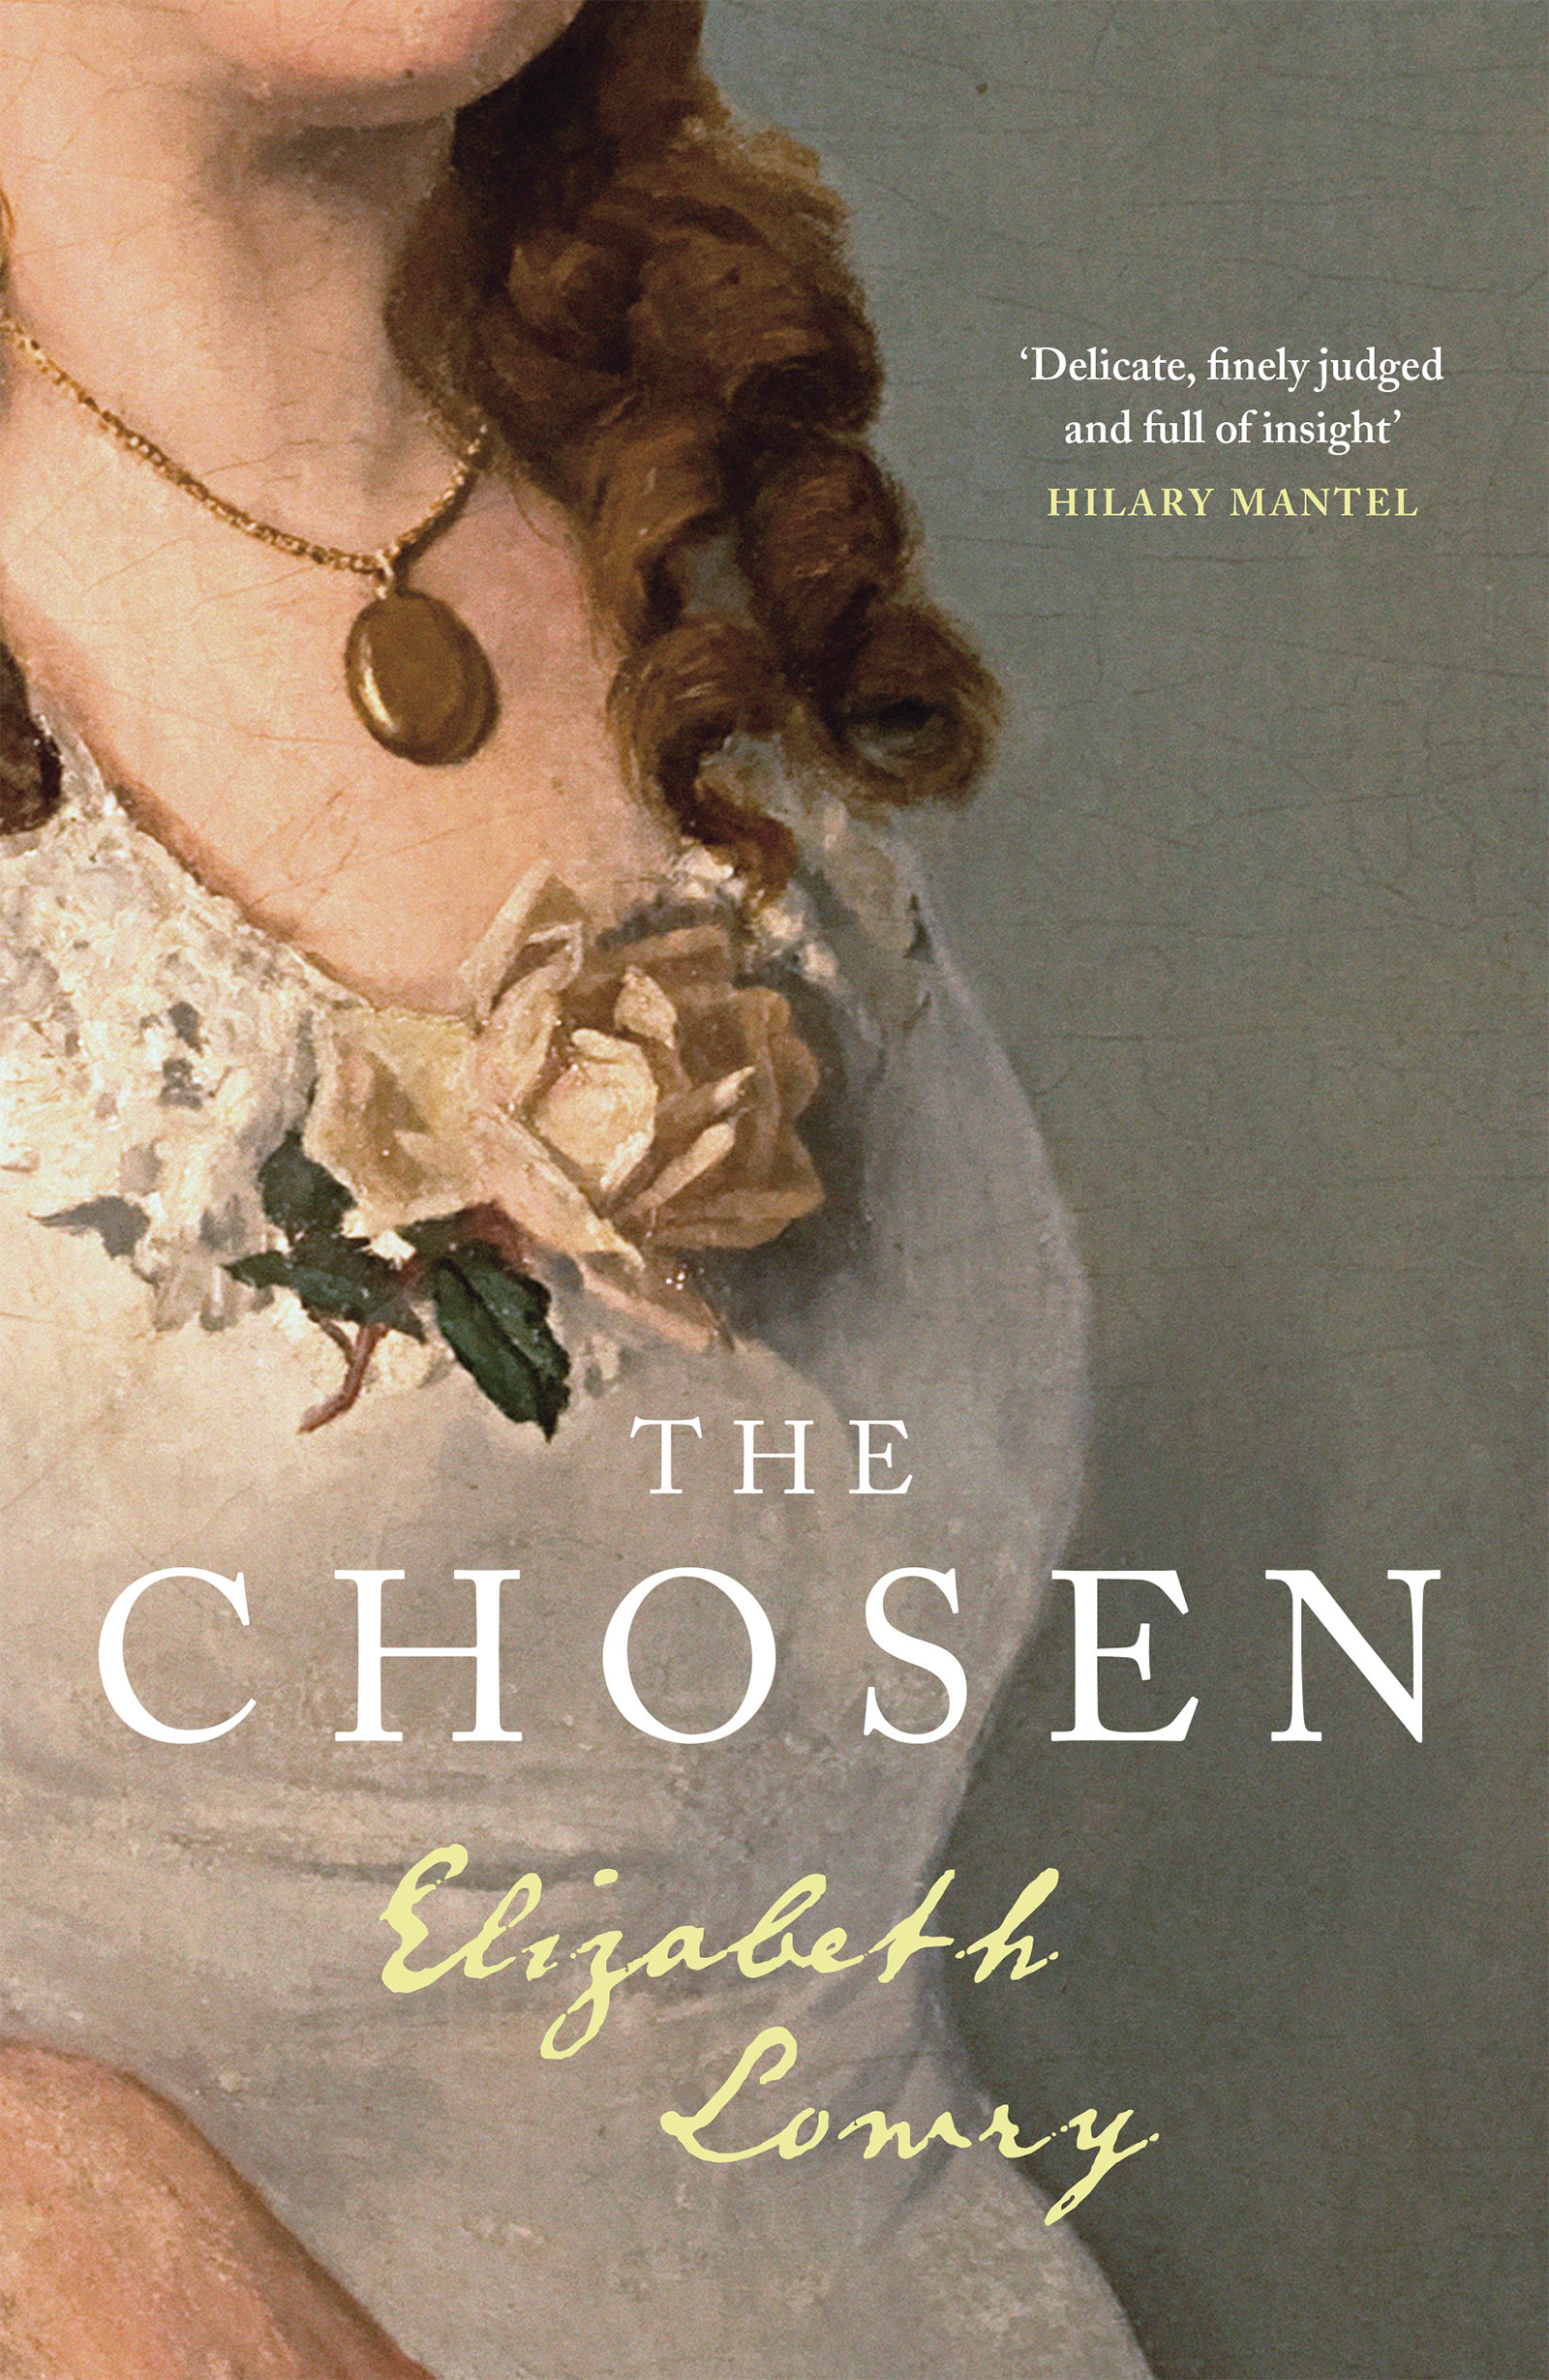 The Chosen : who pays the price of a writer's fame?